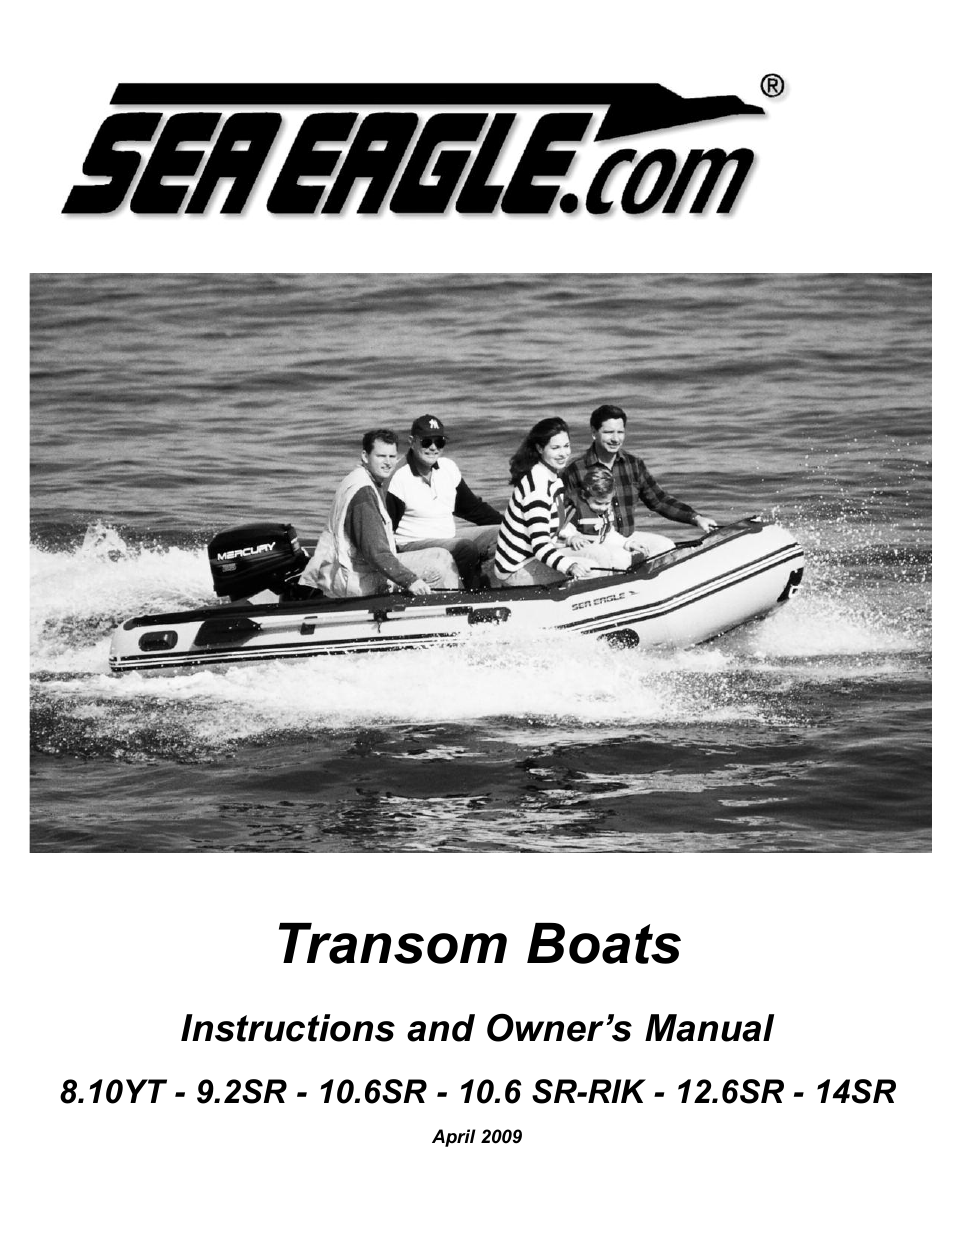 Transom Sport Boats (2009 and earlier)